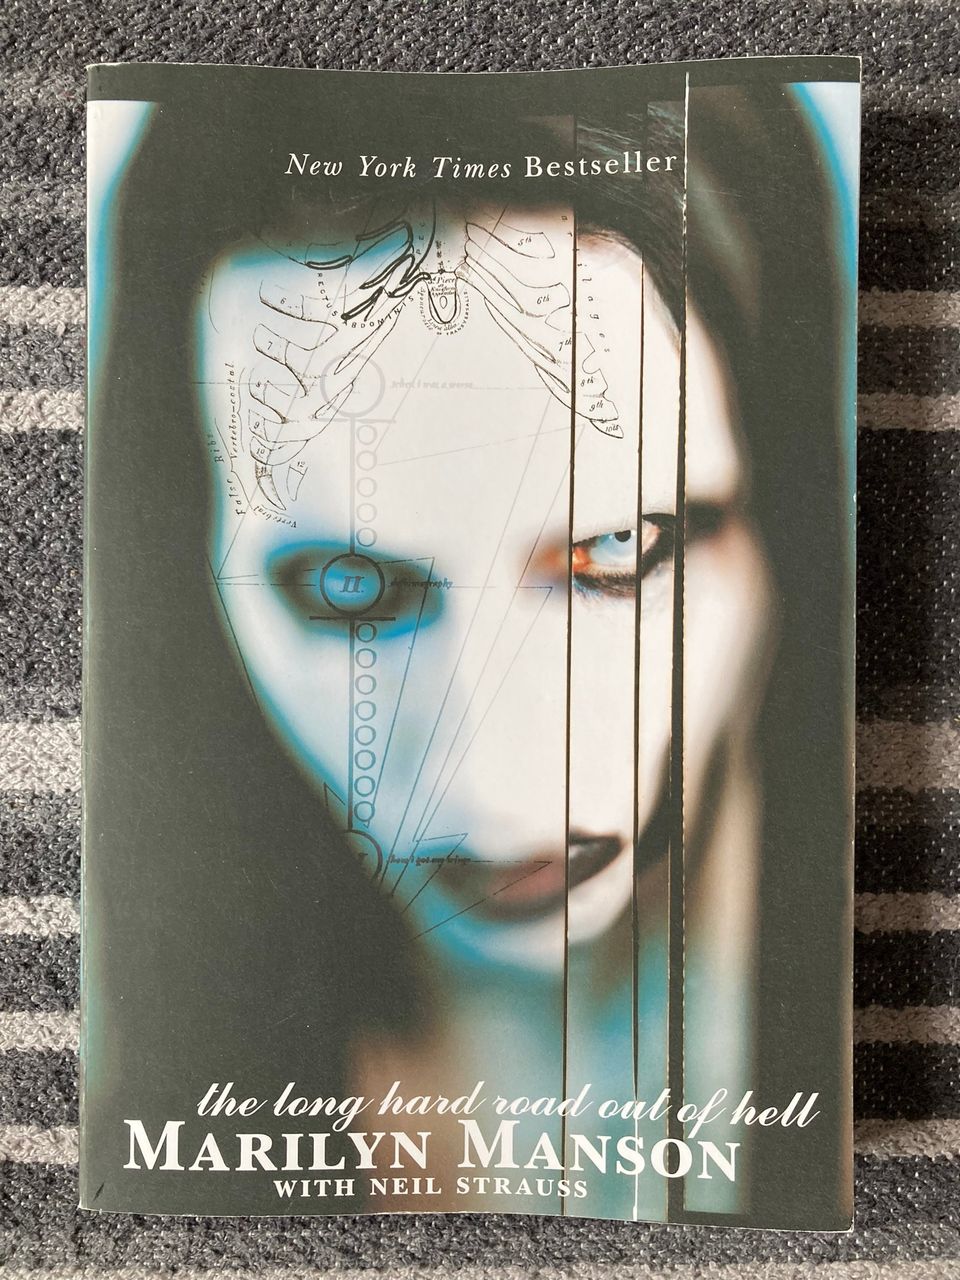 The long hard road out of hell, Marilyn Manson